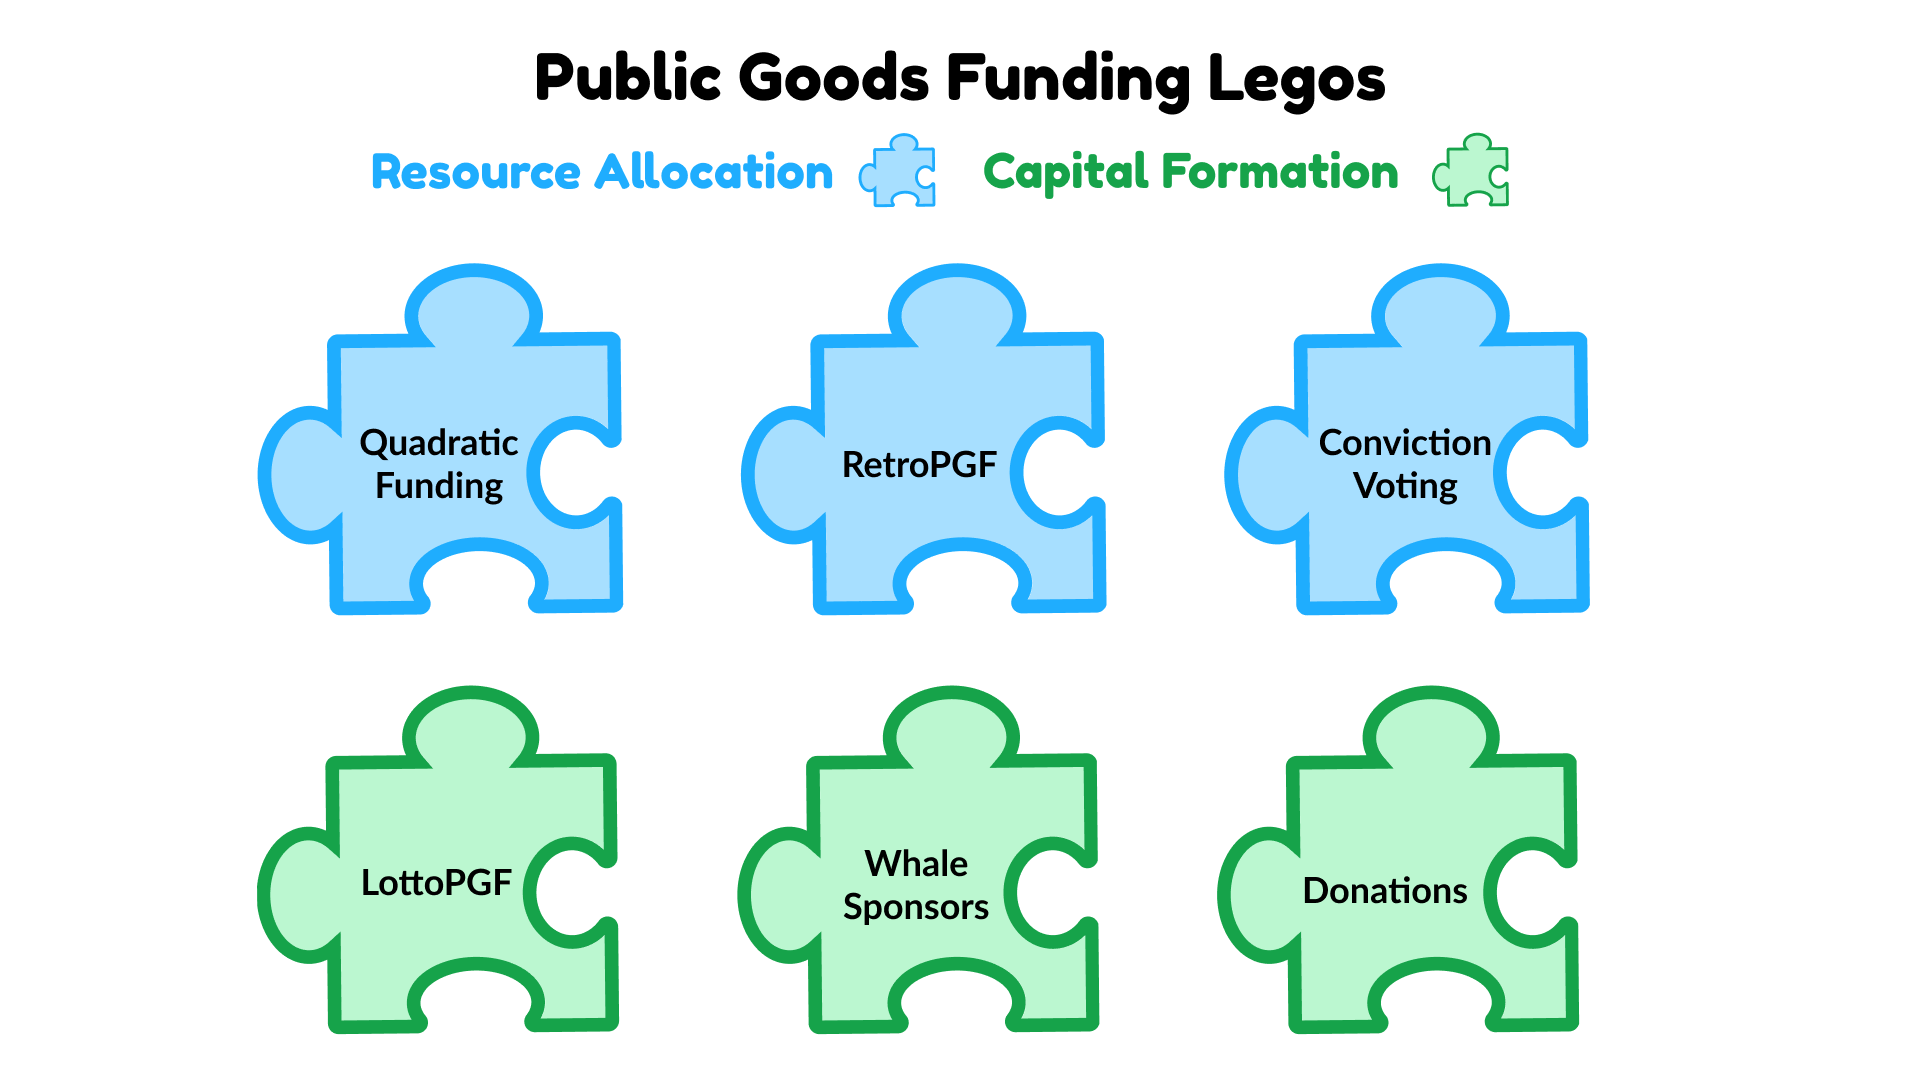 Public Goods Funding categorised in "Resource Allocation" and "Capital Formation"